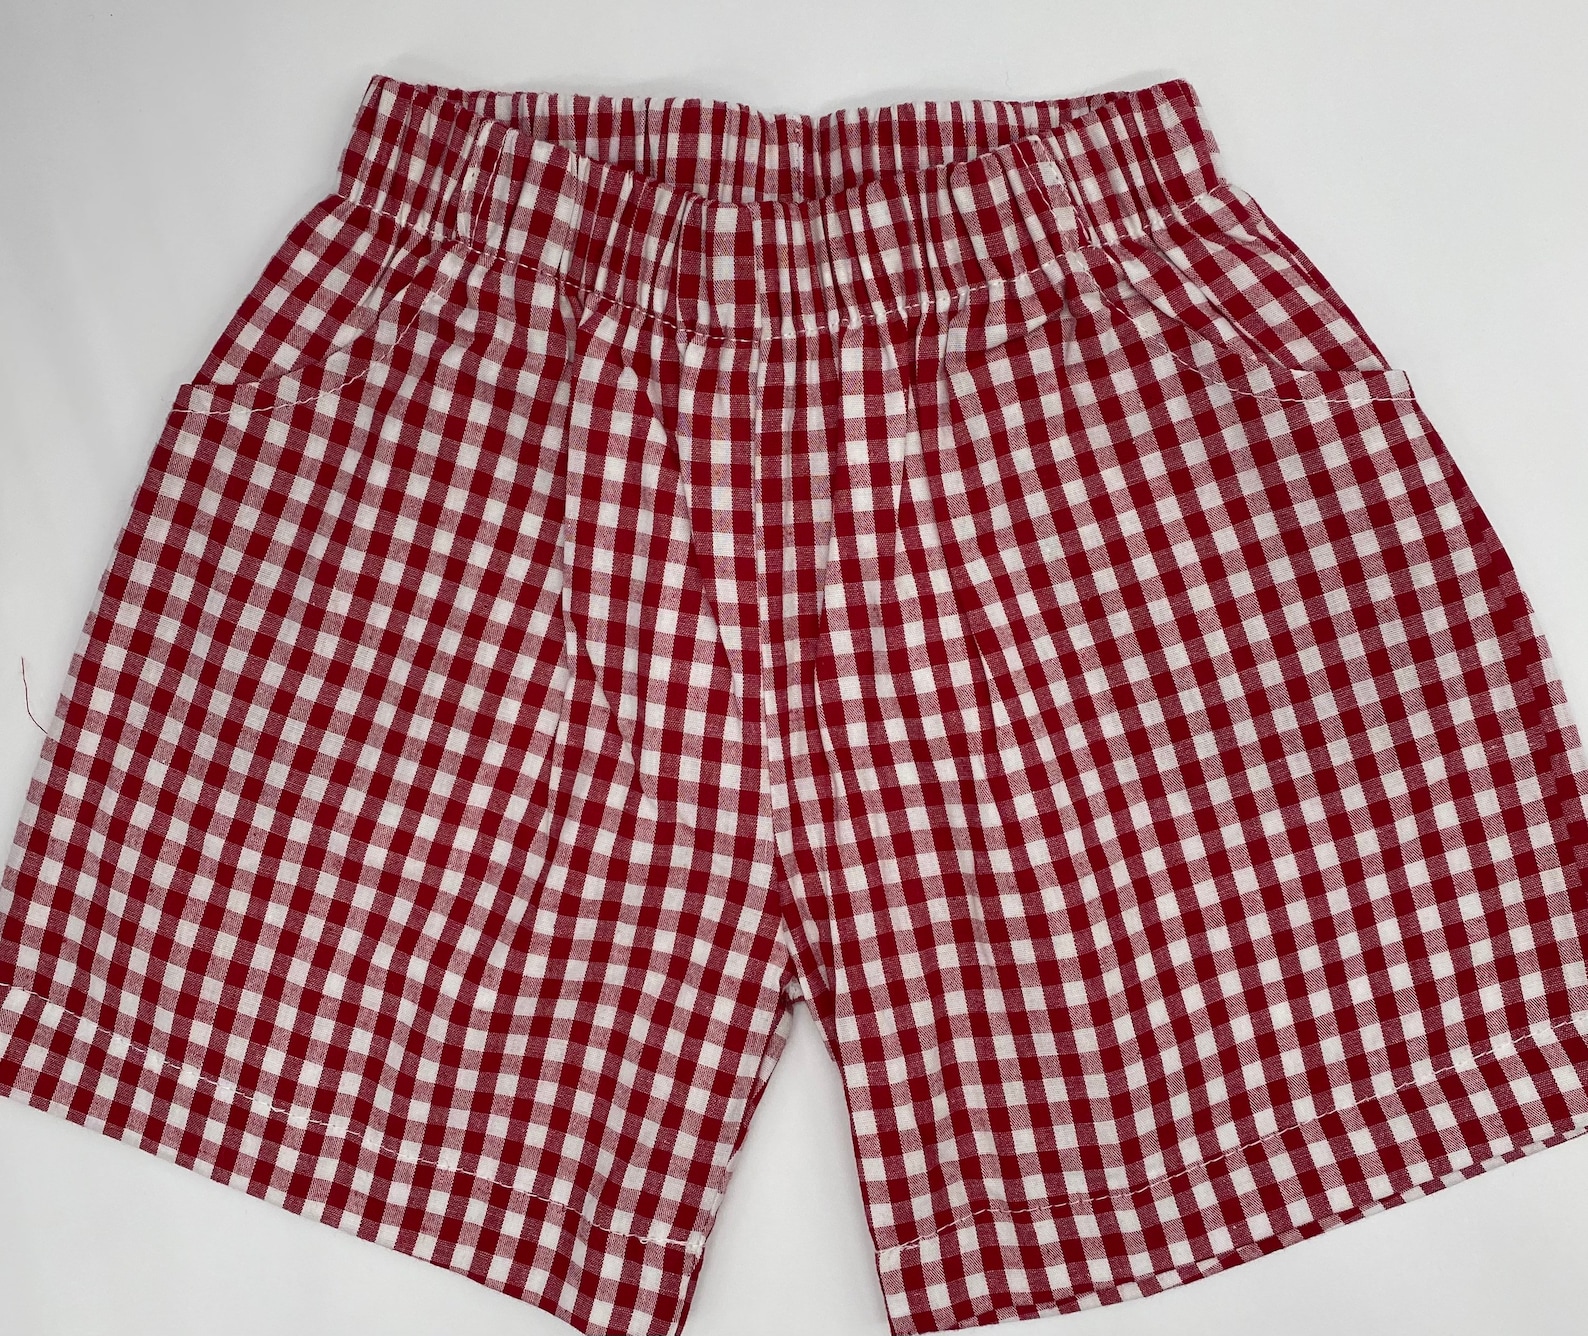 Boys Gingham Shorts Boutique Quality Cotton Blue Red or | Etsy